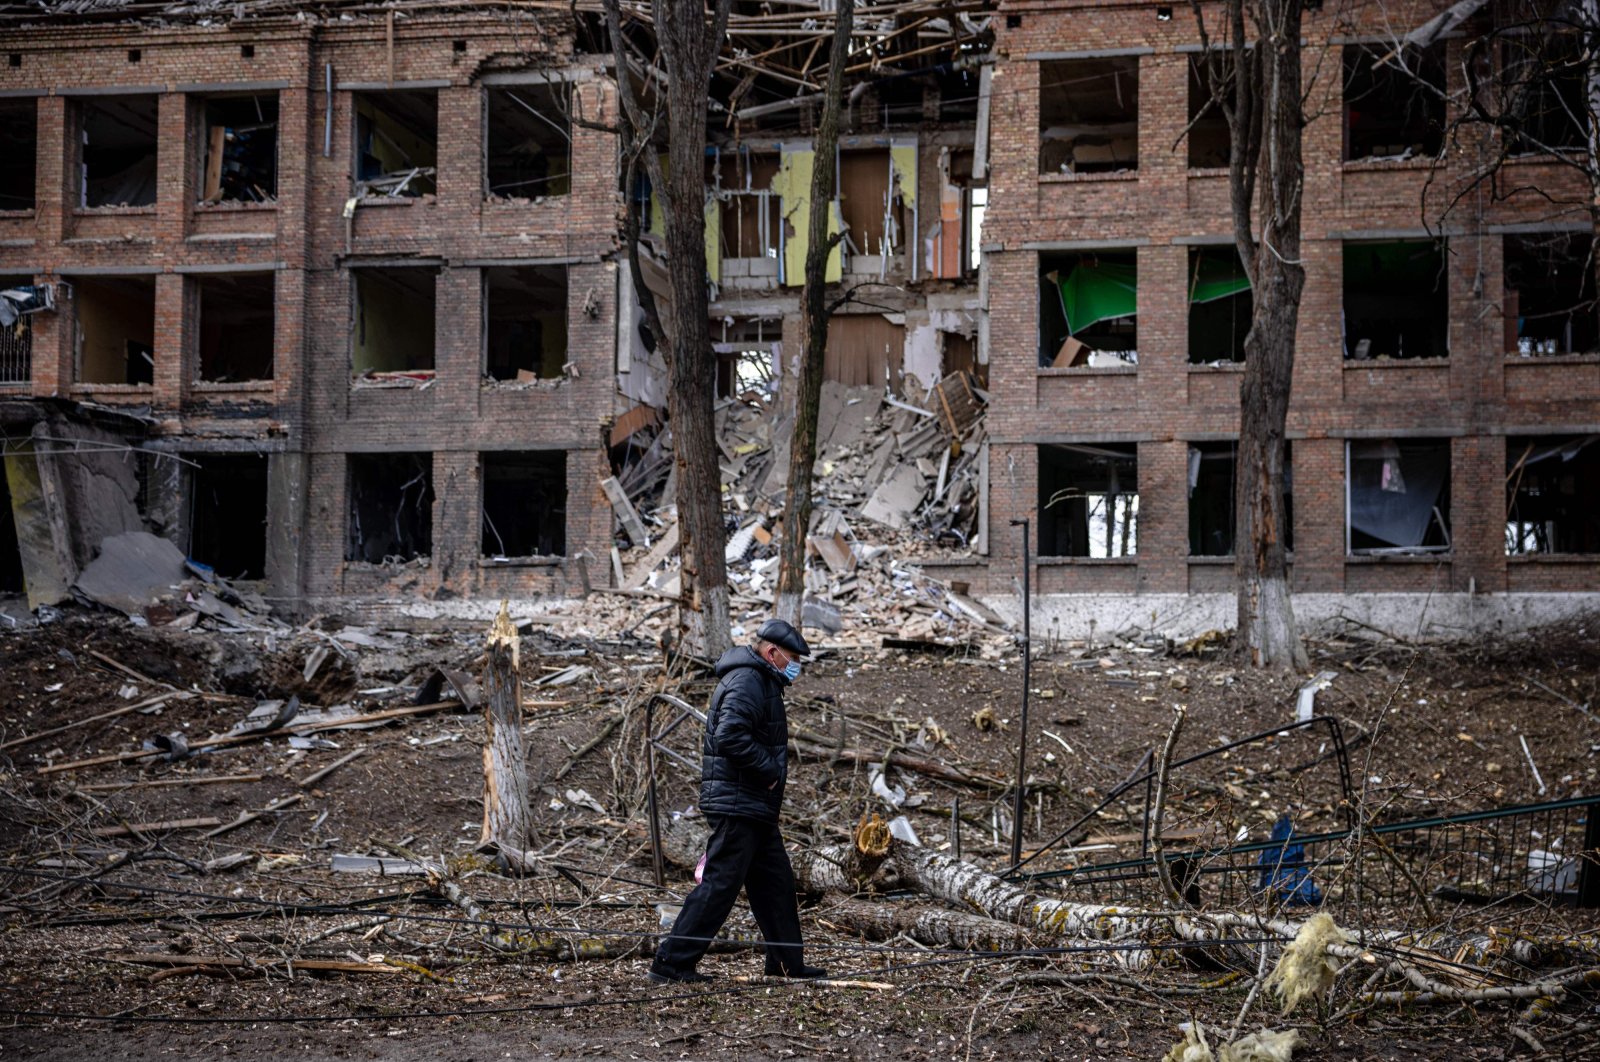 A man walks in front of a destroyed building after a Russian missile attack in the town of Vasylkiv, near Kyiv, Ukraine, Feb. 27, 2022. (AFP)